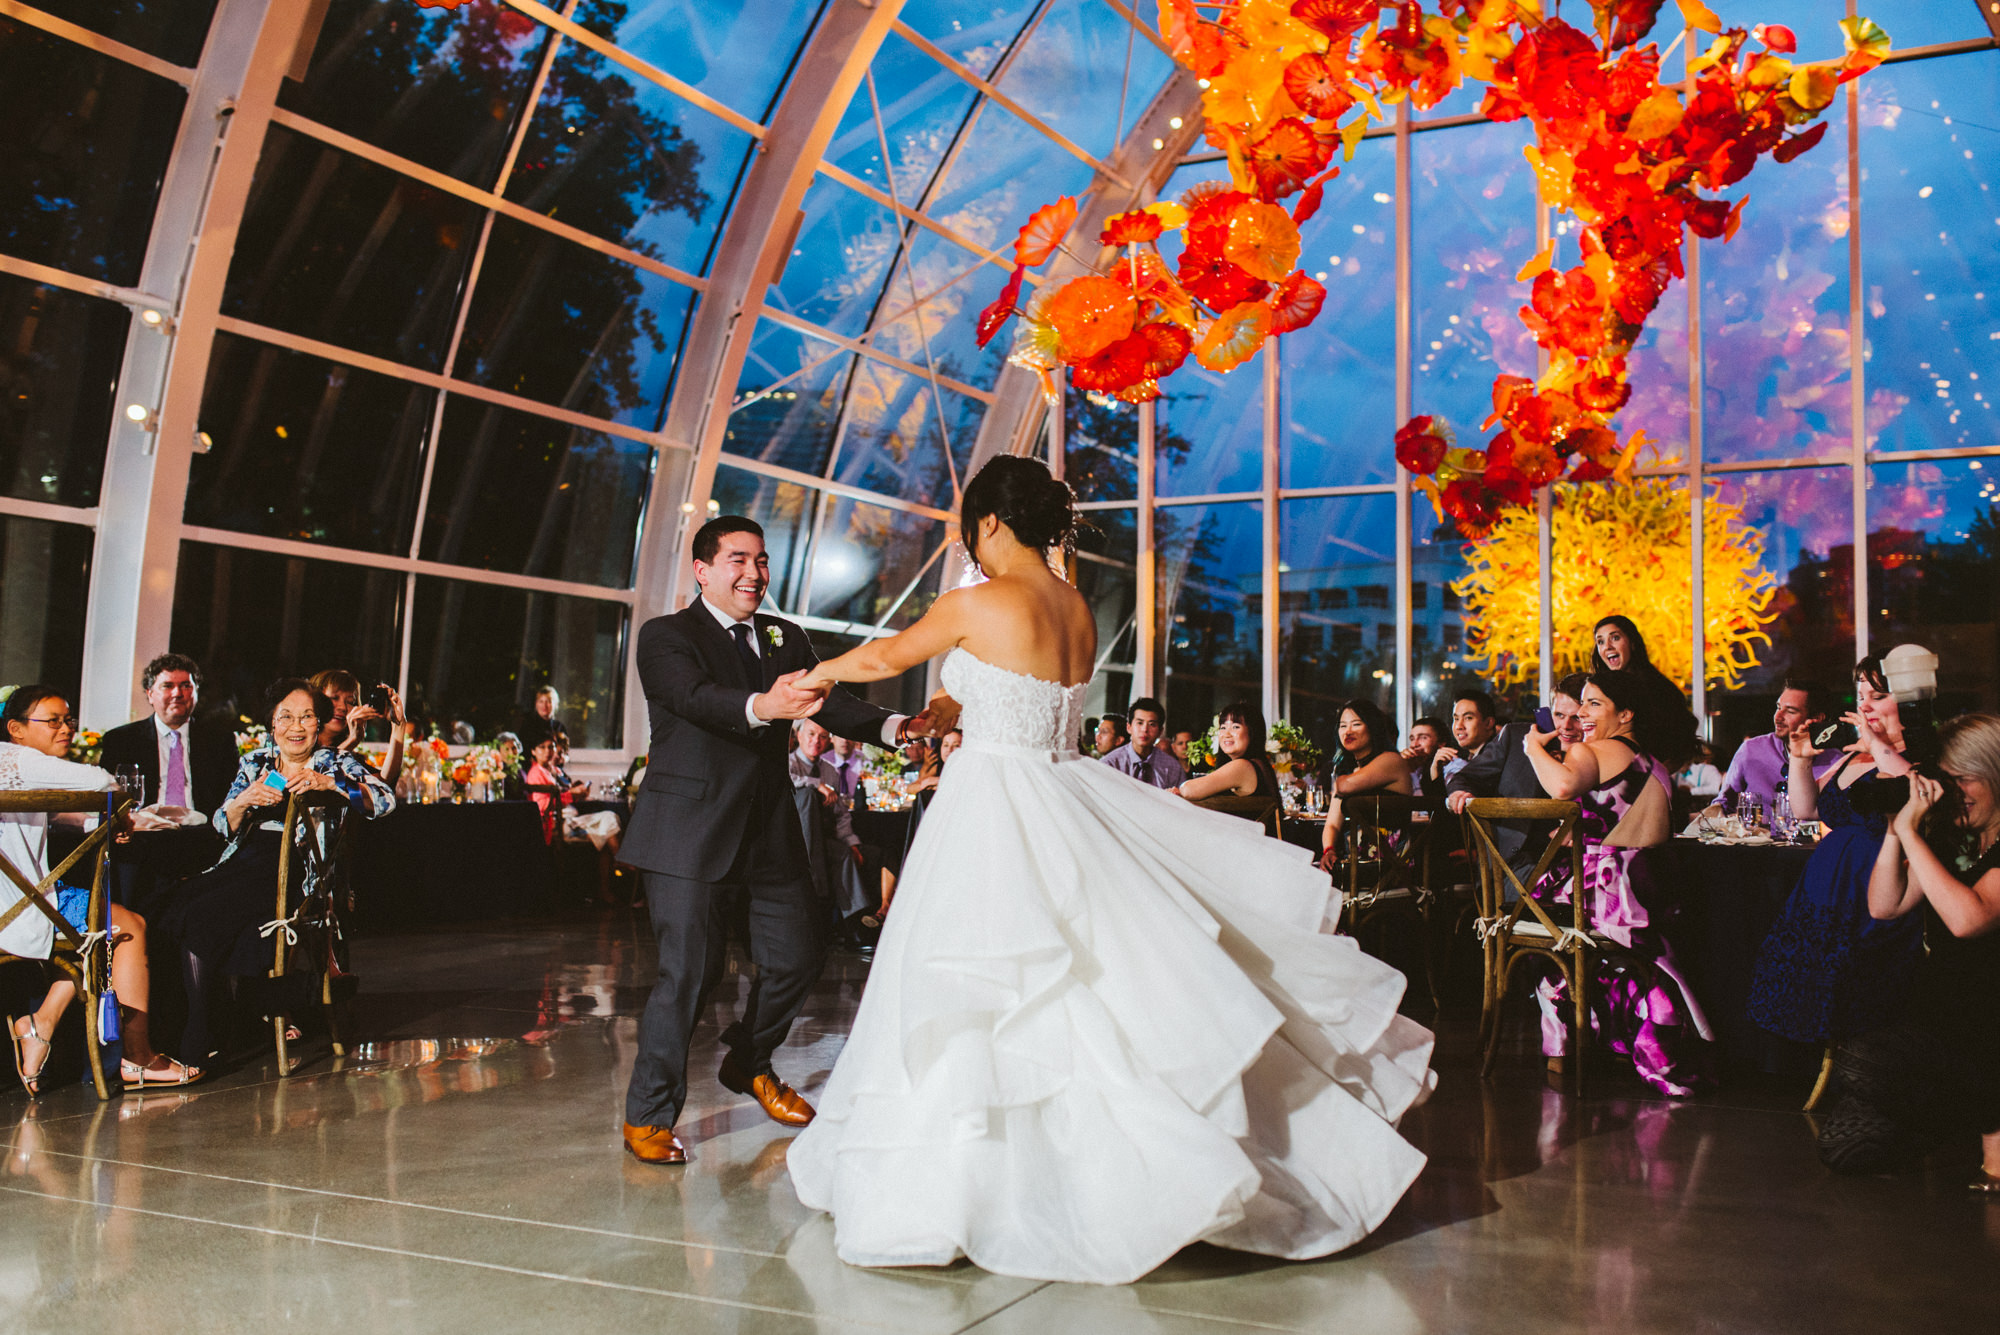 Amy and Jeremy share their first dance at Chihuly Garden and Glass